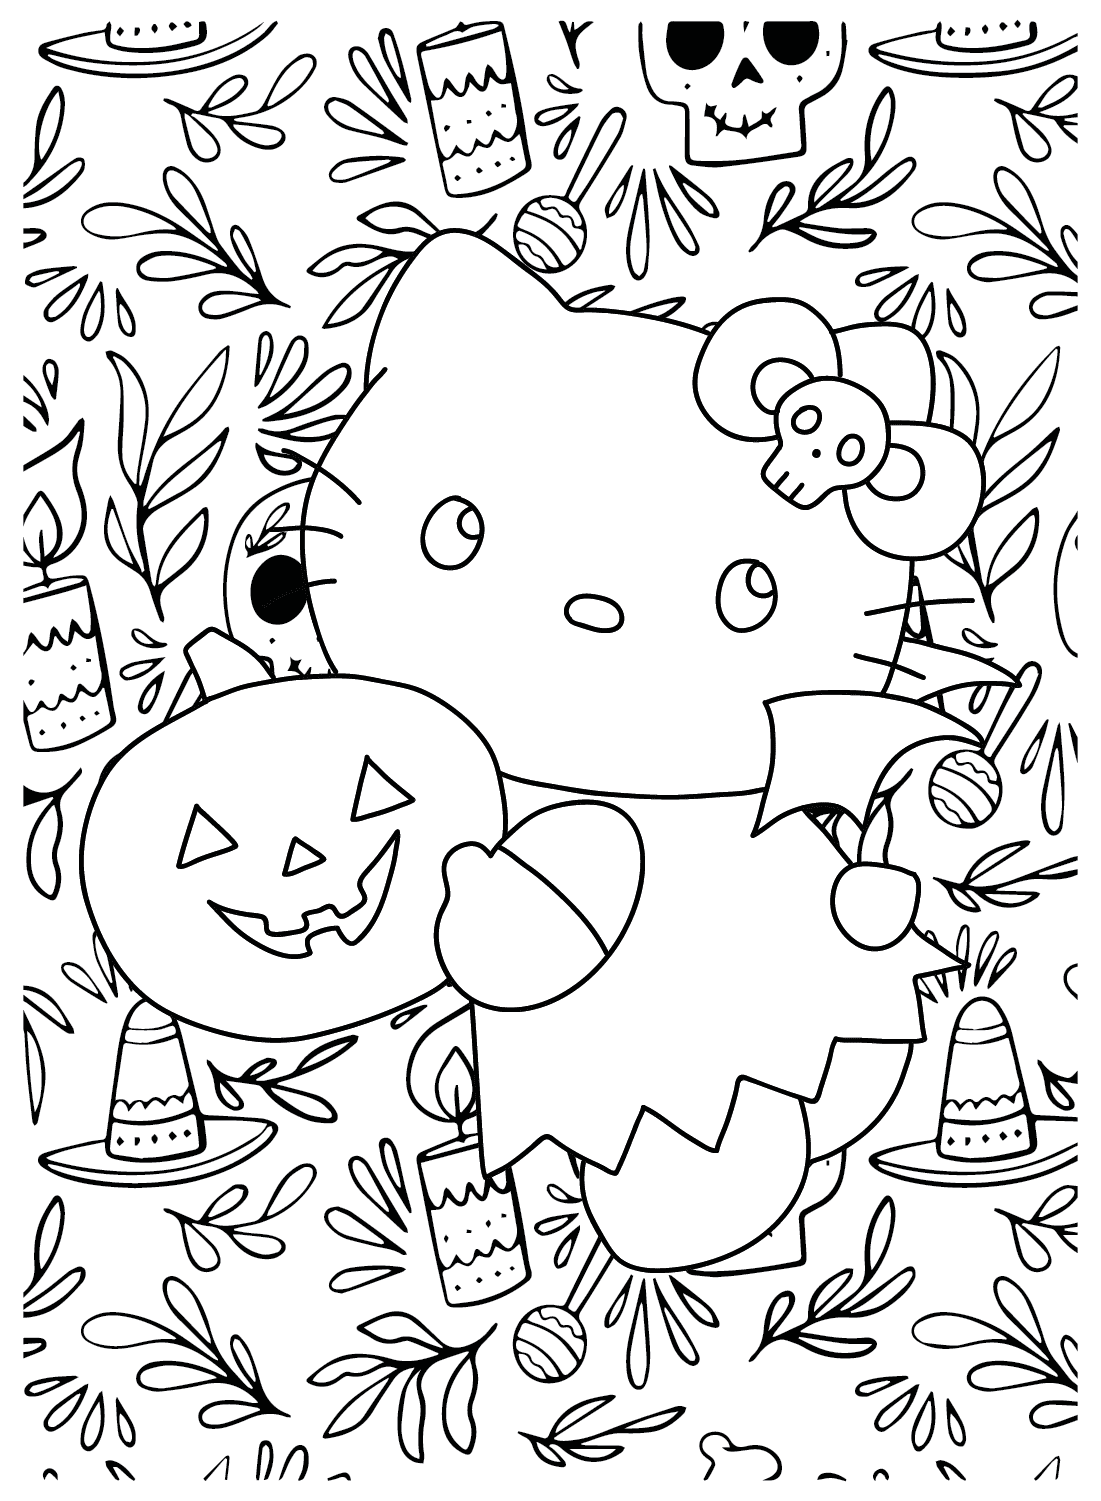 Coloring Pages of Hello Kitty Halloween